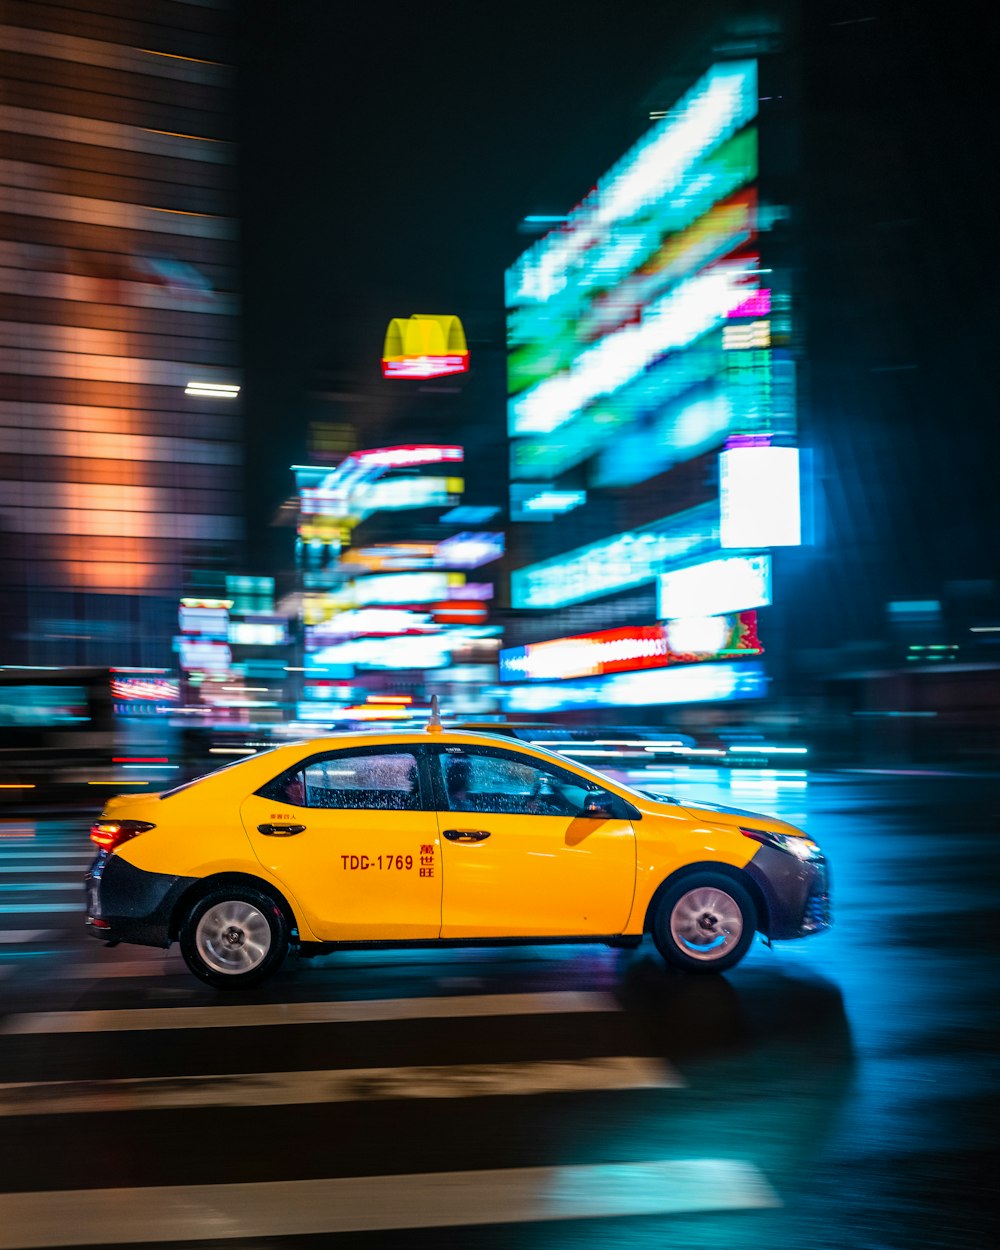 a taxi cab on a street at night